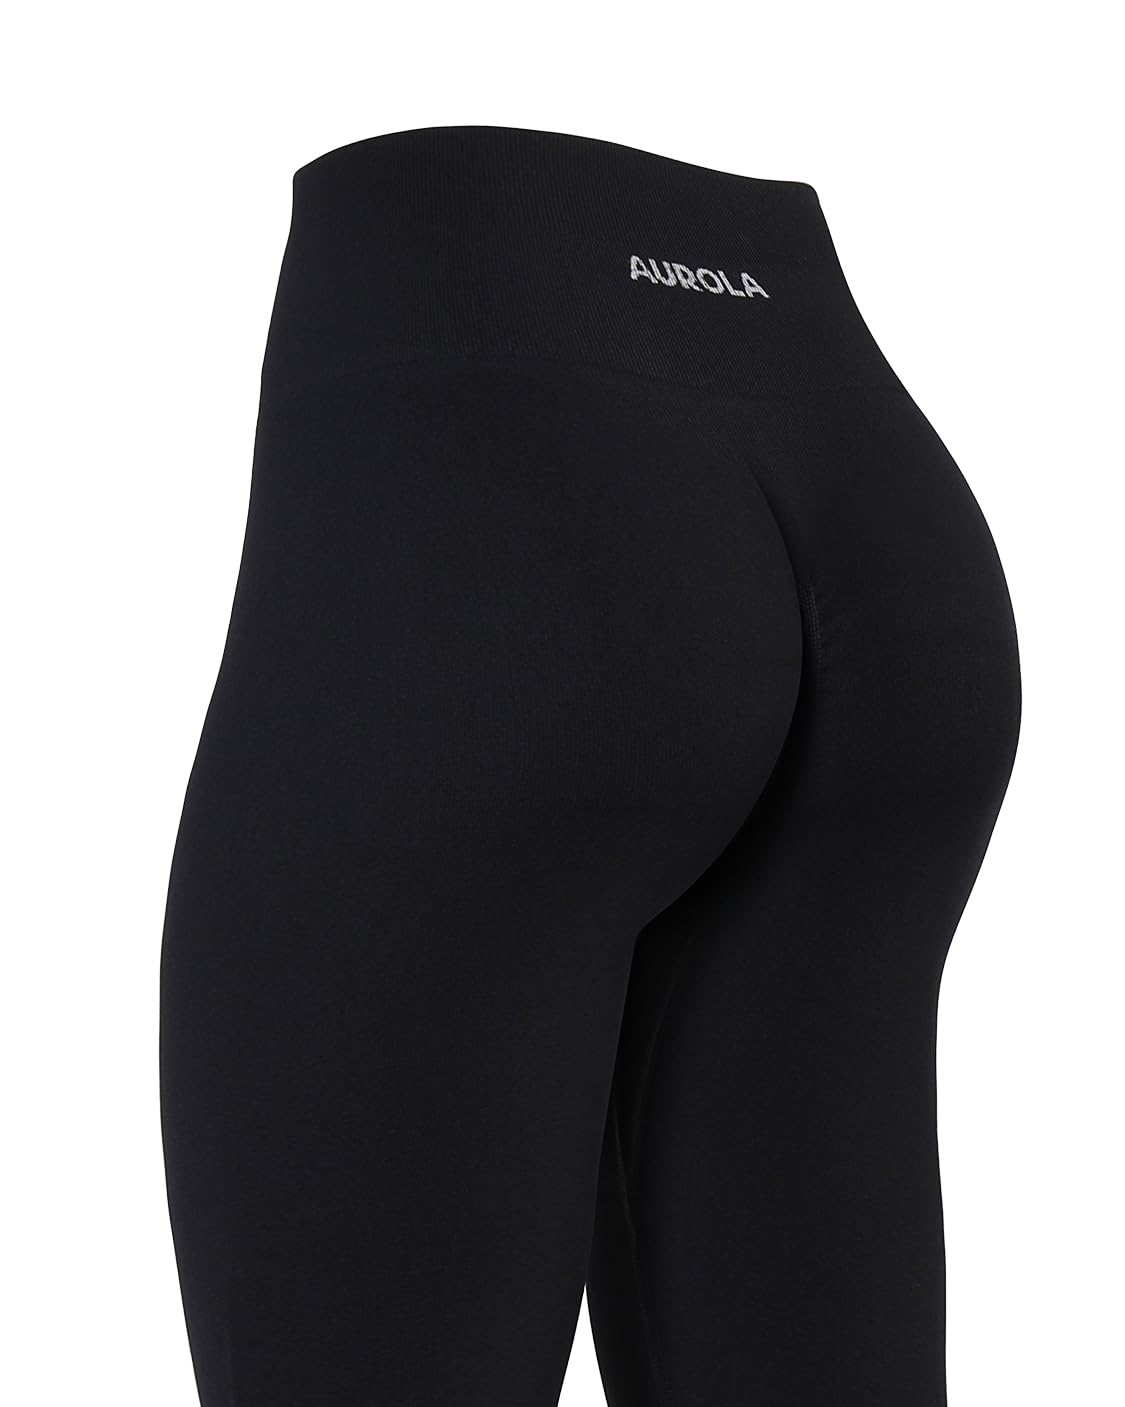 Buy AUROLA Power Workout Leggings for Women Tummy Control Squat Proof  Ribbed Thick Seamless Scrunch Active Pants